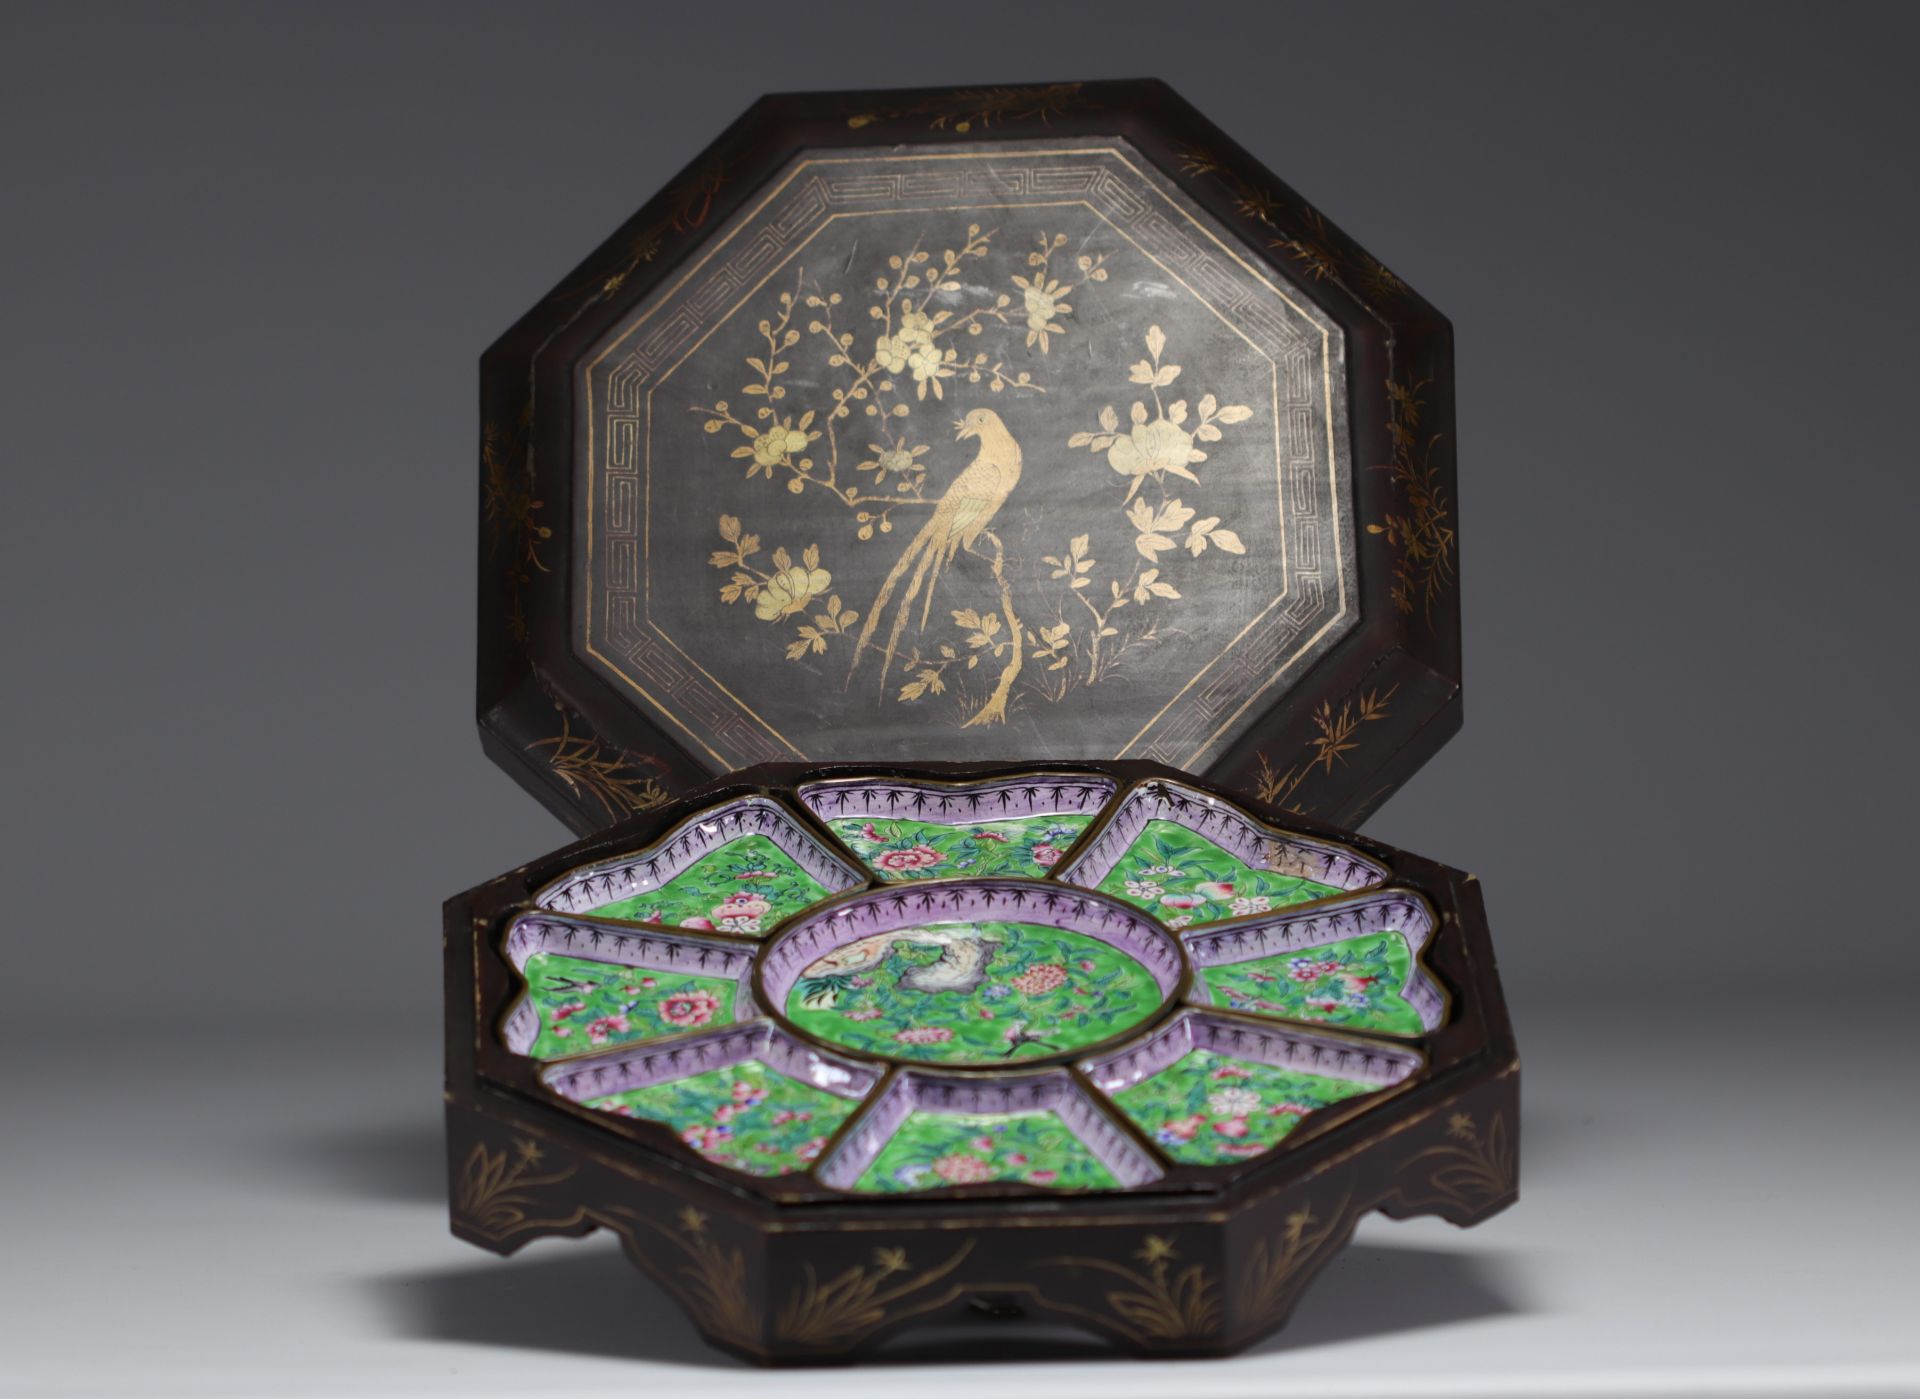 China - Set of cloisonne enamel dishes with floral and bird decor in original lacquer box, 19th cent